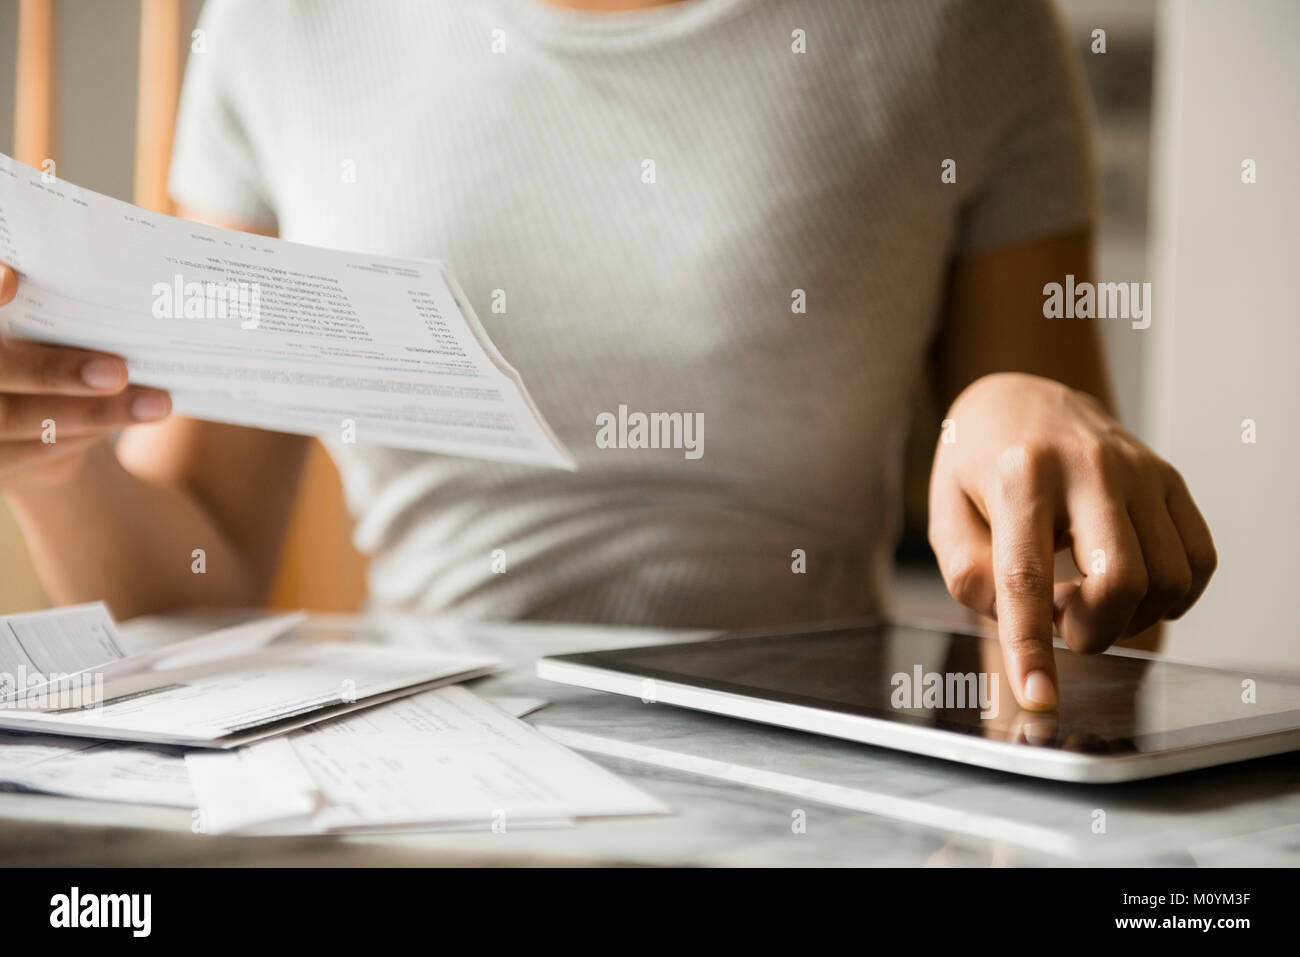 African American Woman paying bills with digital tablet Banque D'Images